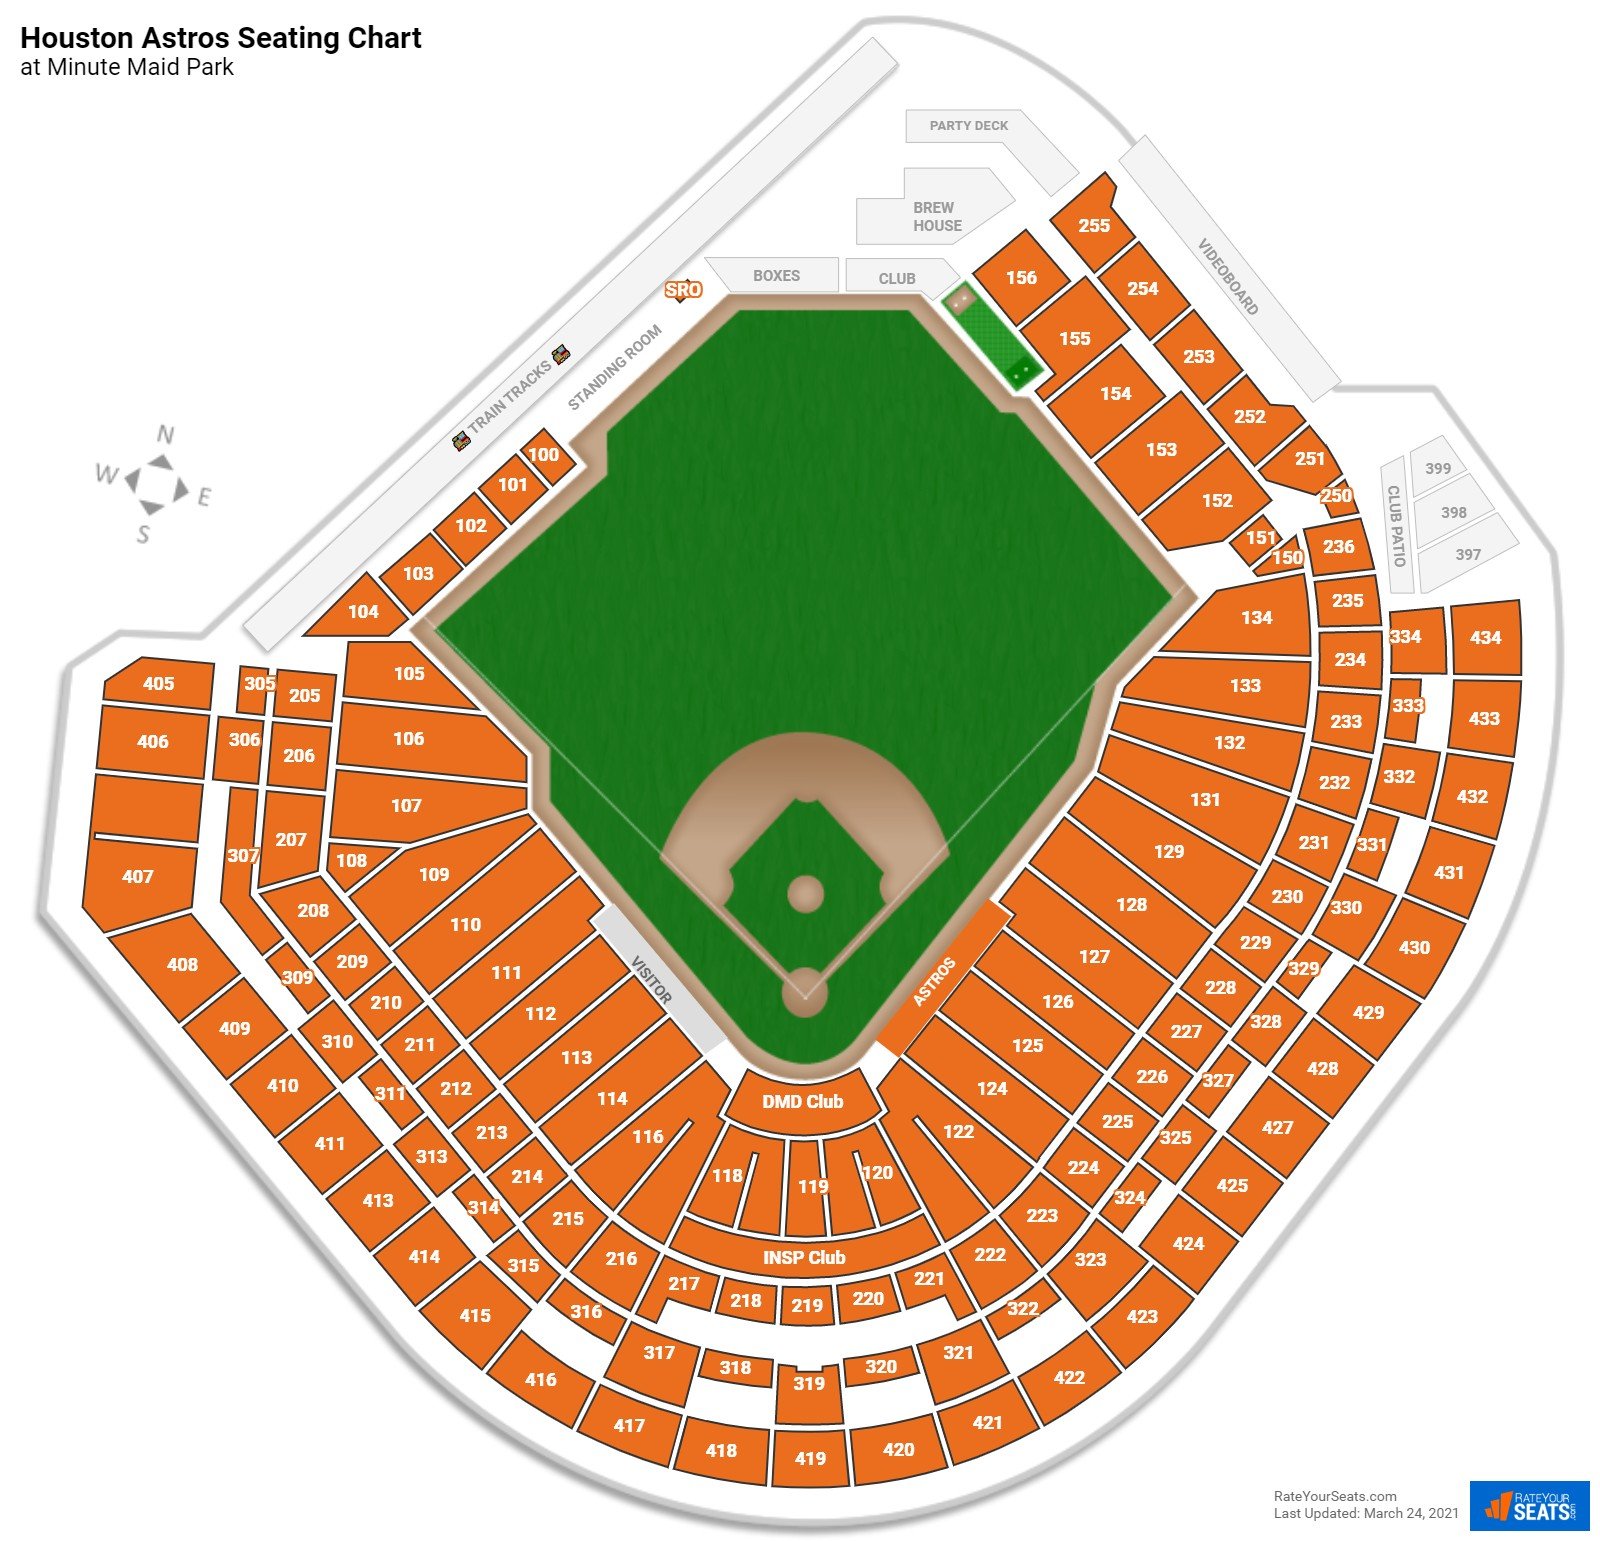 Minute Maid Park Seating Chart, Minute Maid Park